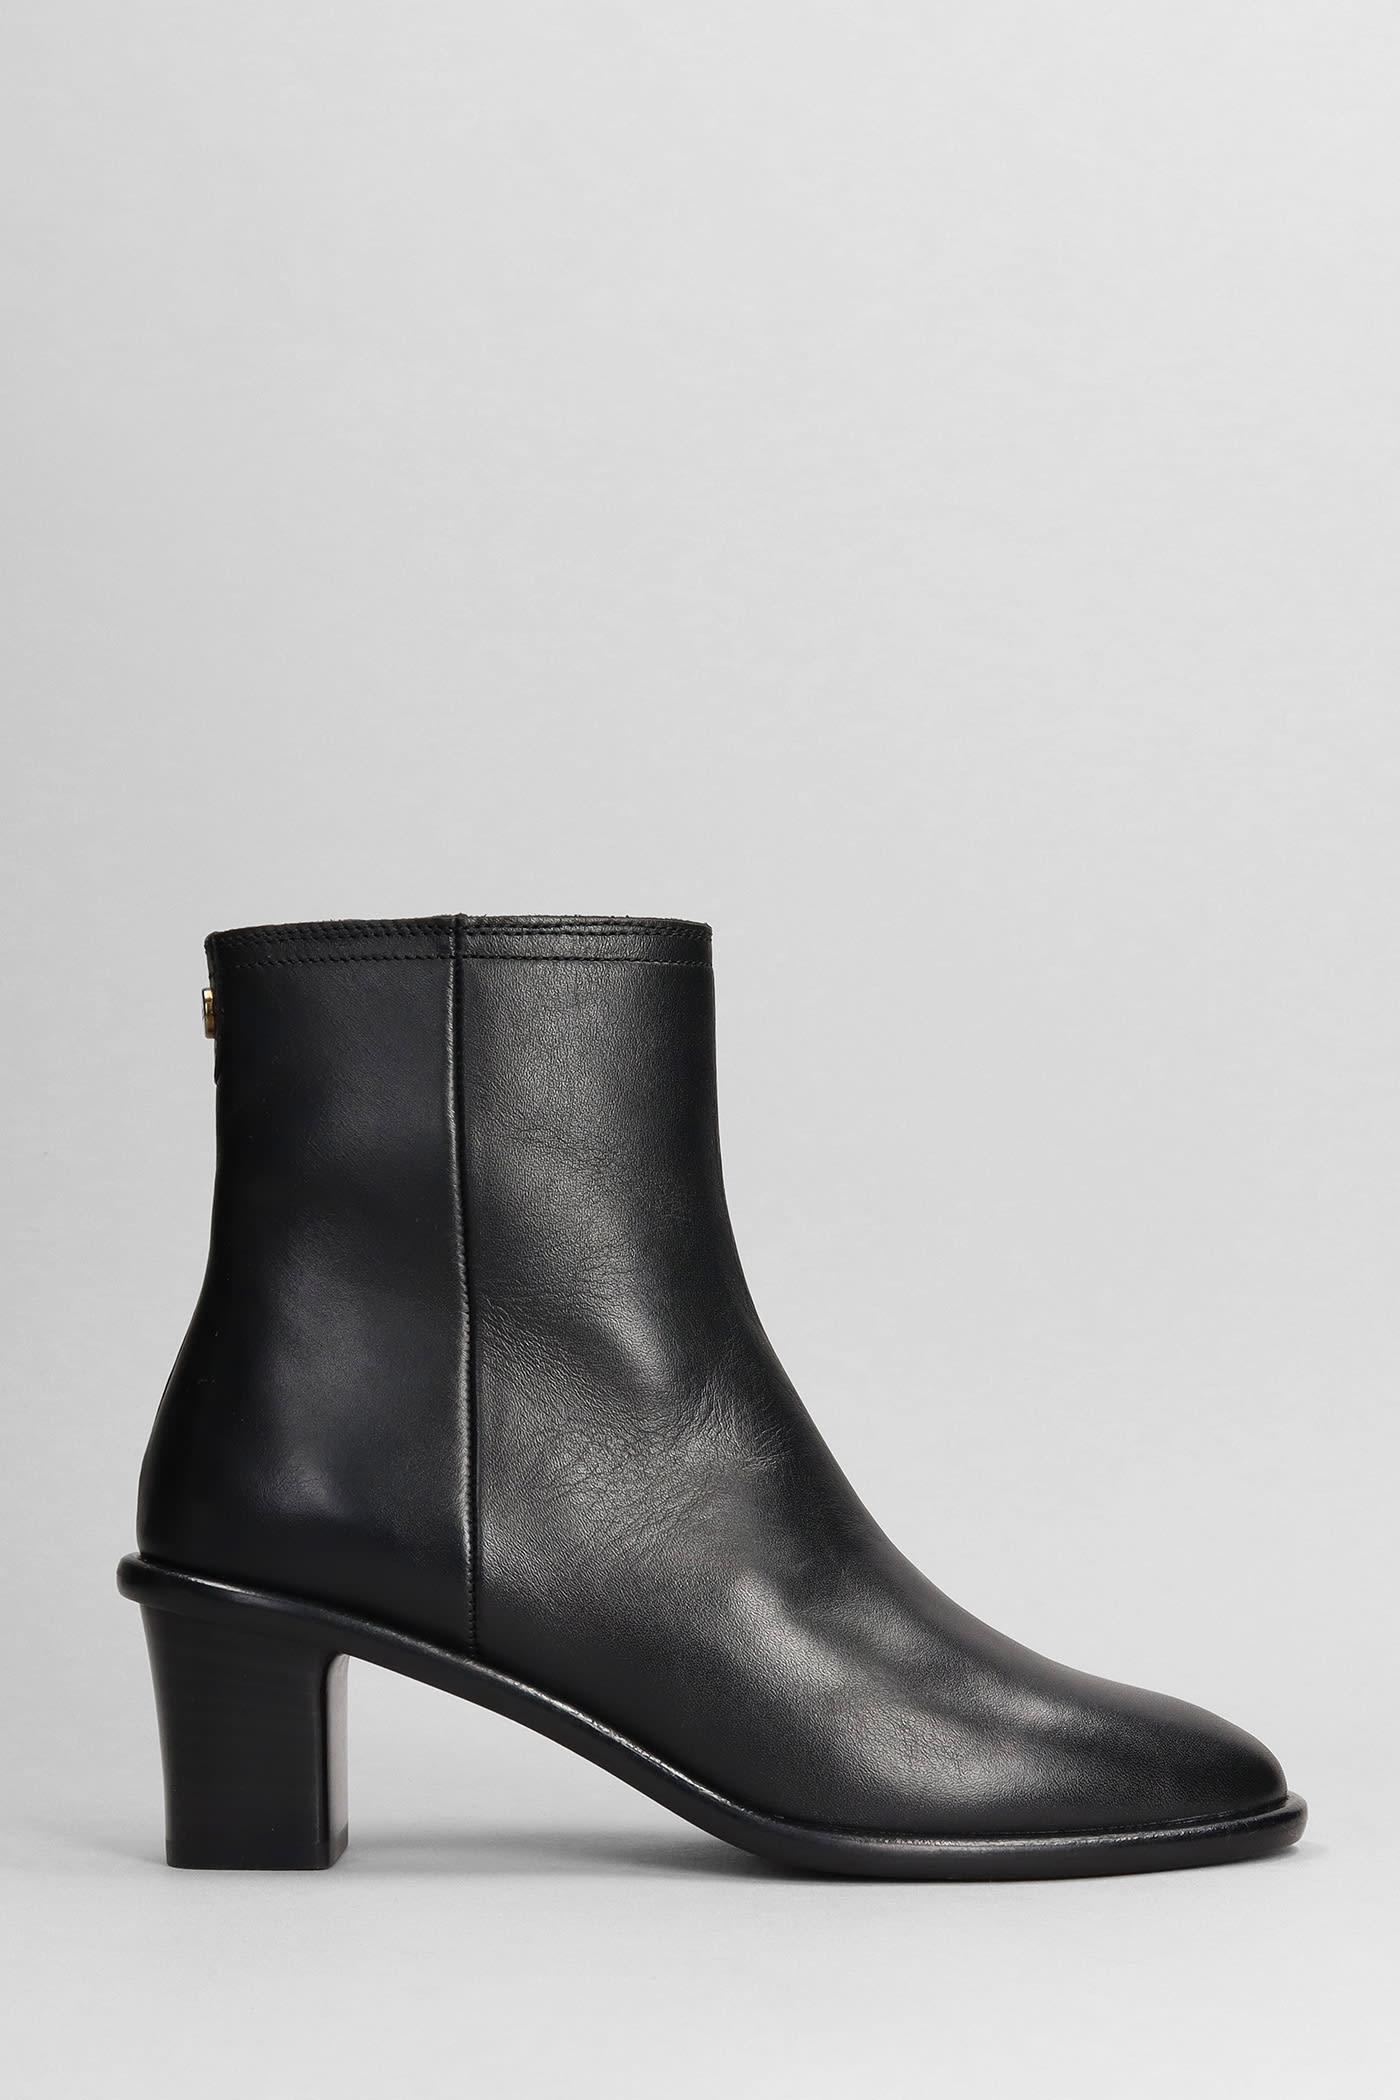 Isabel Marant Gelda Low Heels Ankle Boots In Black Leather | Lyst